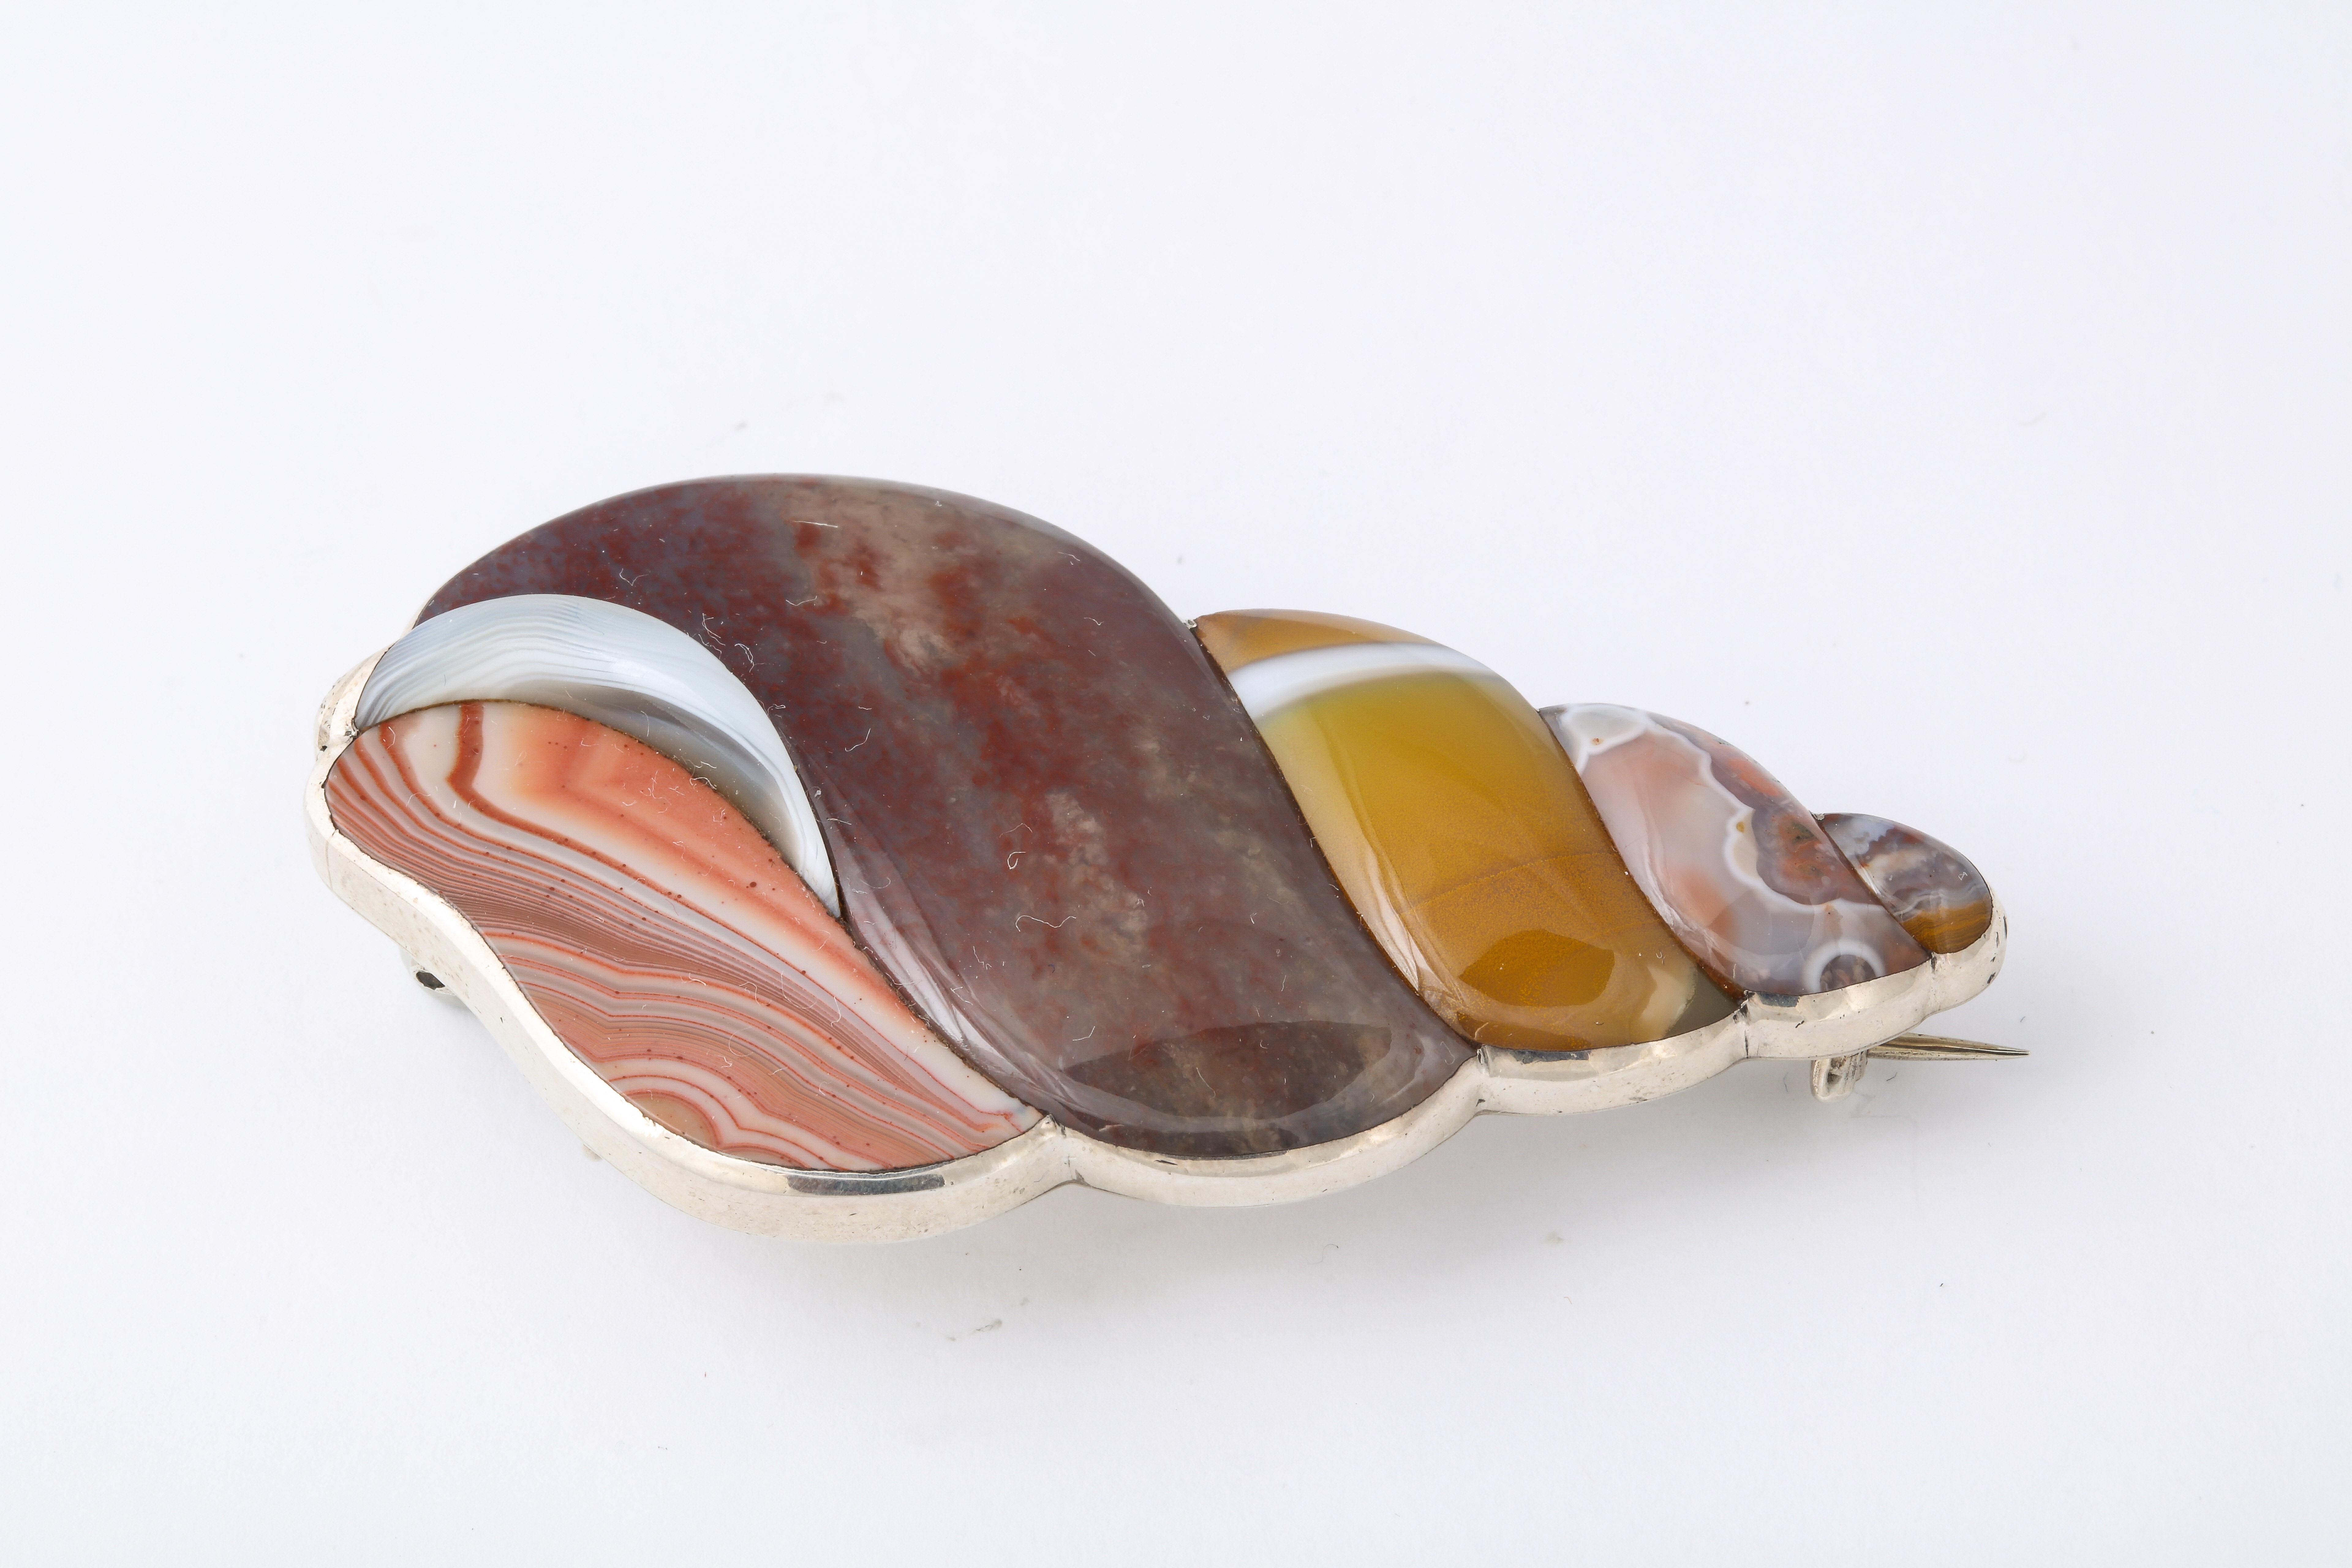 It is hard for a layman to imagine cutting and smoothing natural agate into swirling, shining shapes of beautiful color and patterns as you see in this Agate Sterling Tulip Shell brooch from Scotland. To accomplish this art takes a master jeweler